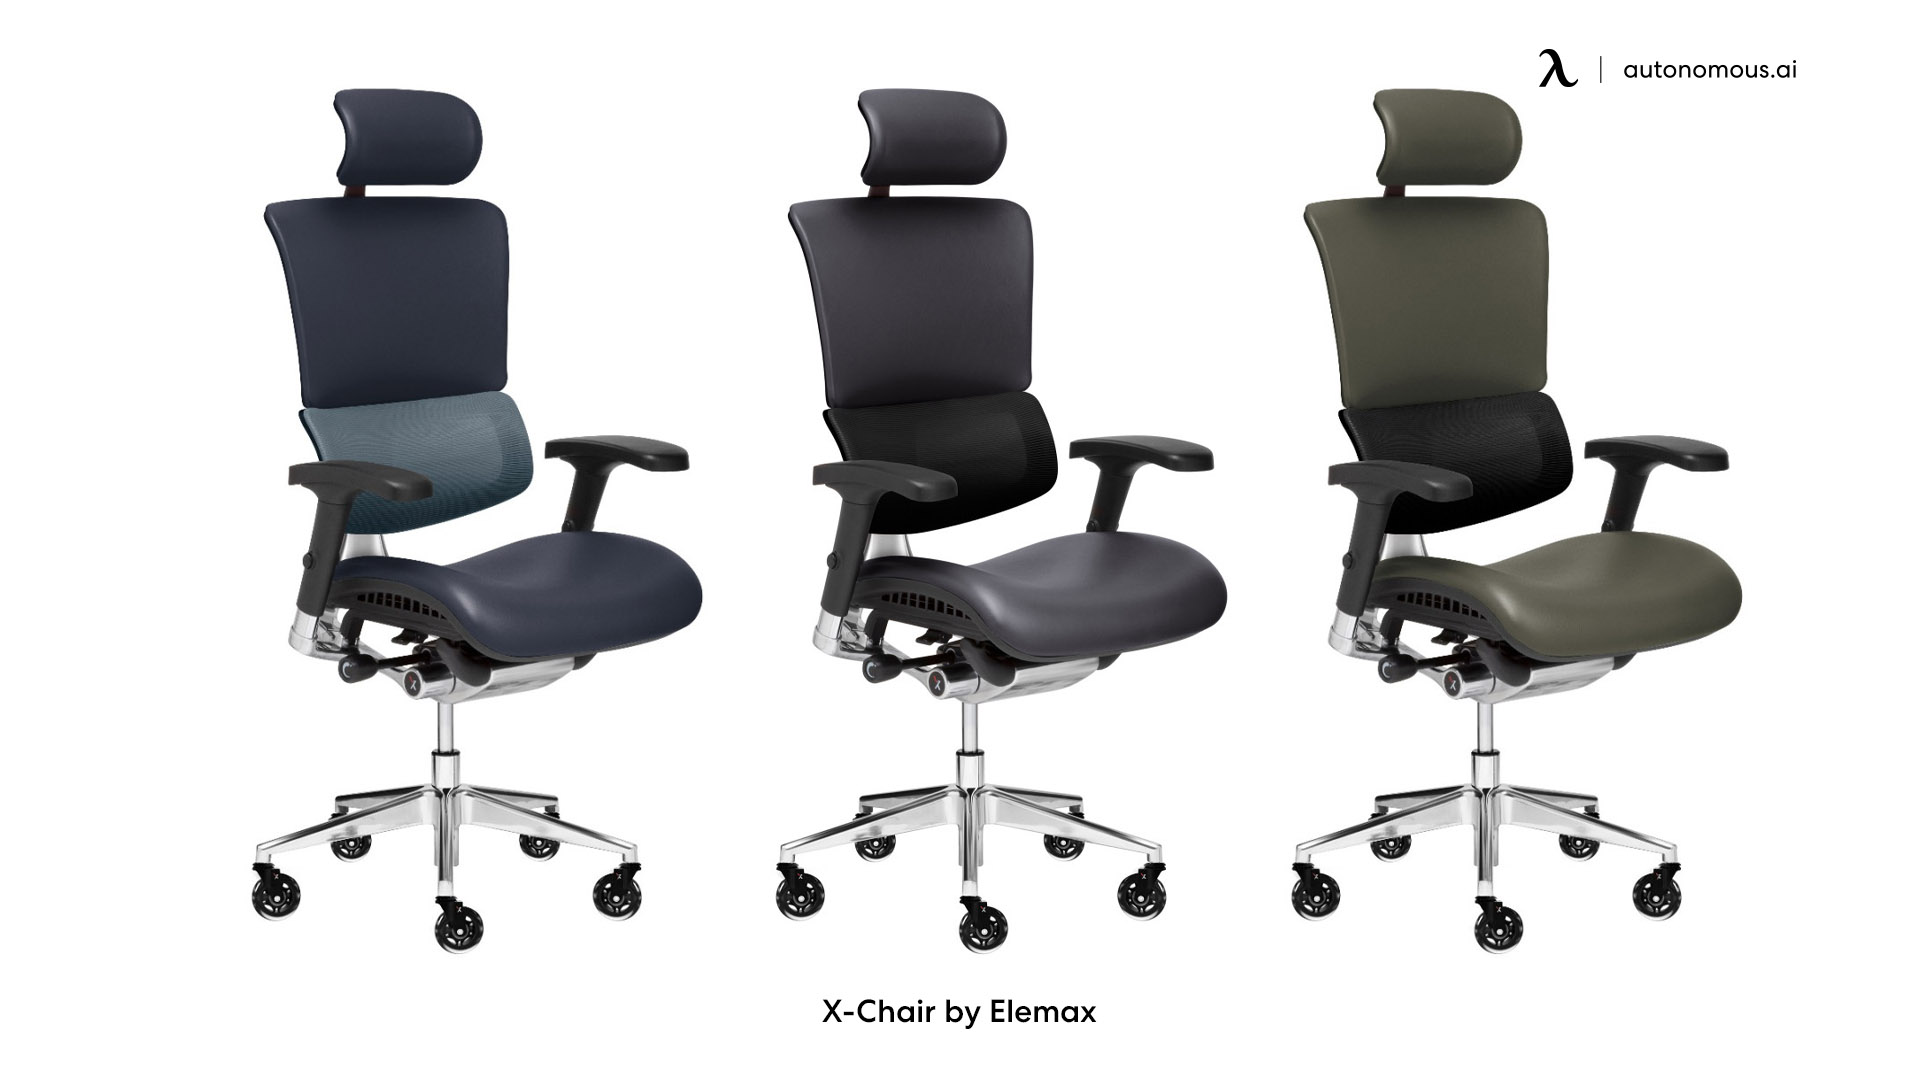 X-Chair by Elemax